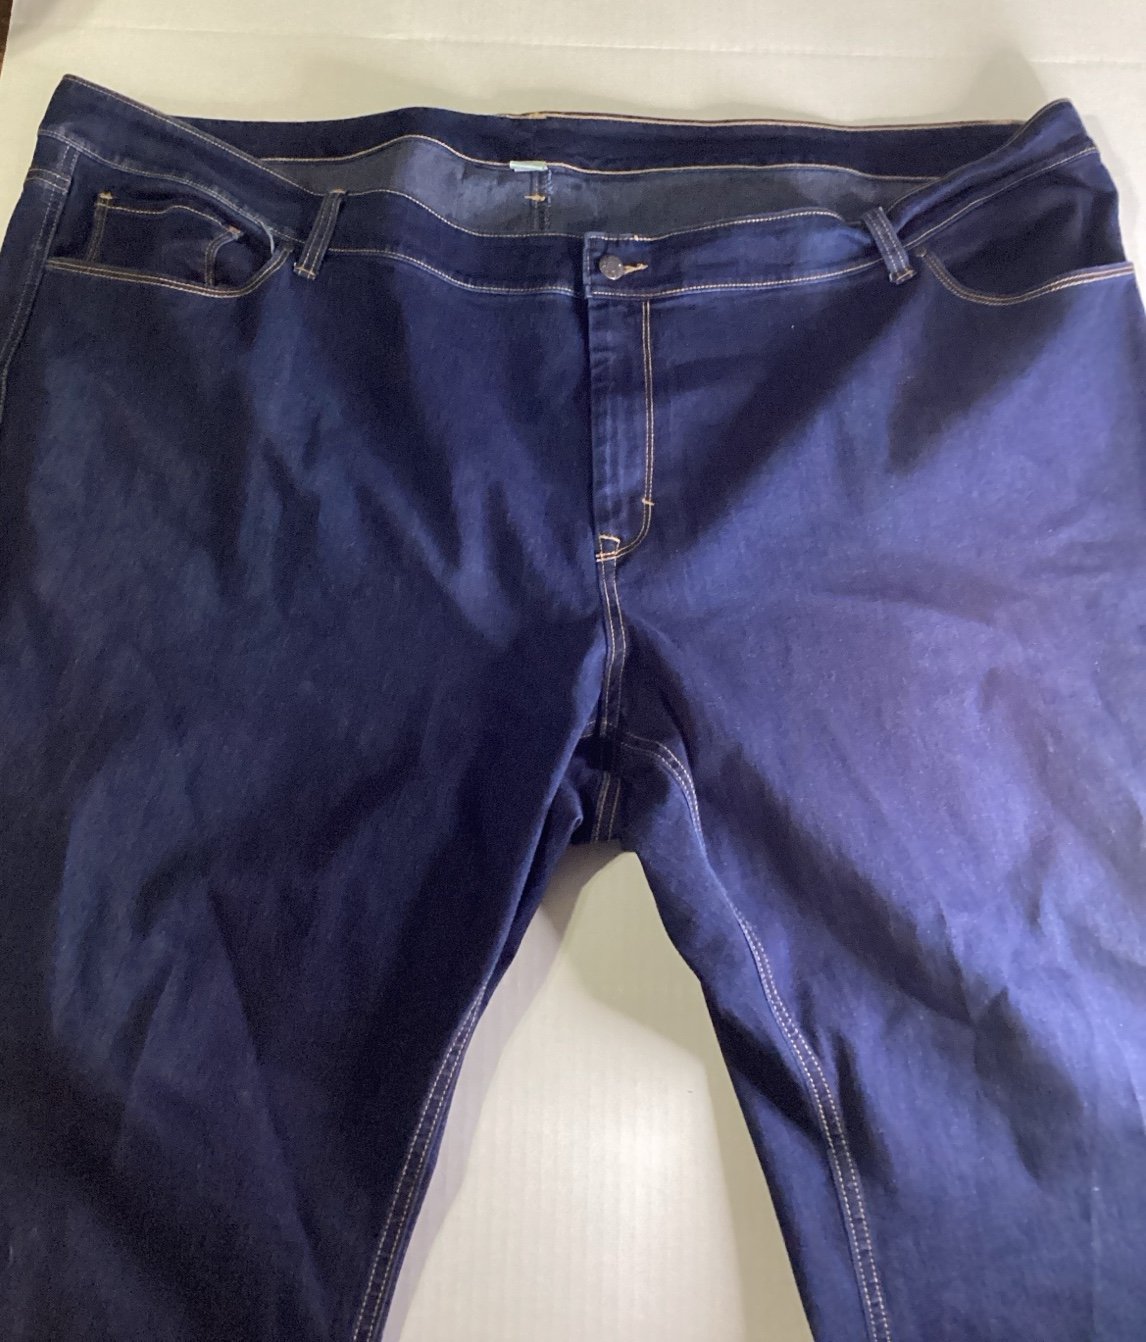 Discounted Old Navy Plus Size Jeans Size 30 Short j1dOGwX4x Outlet Store